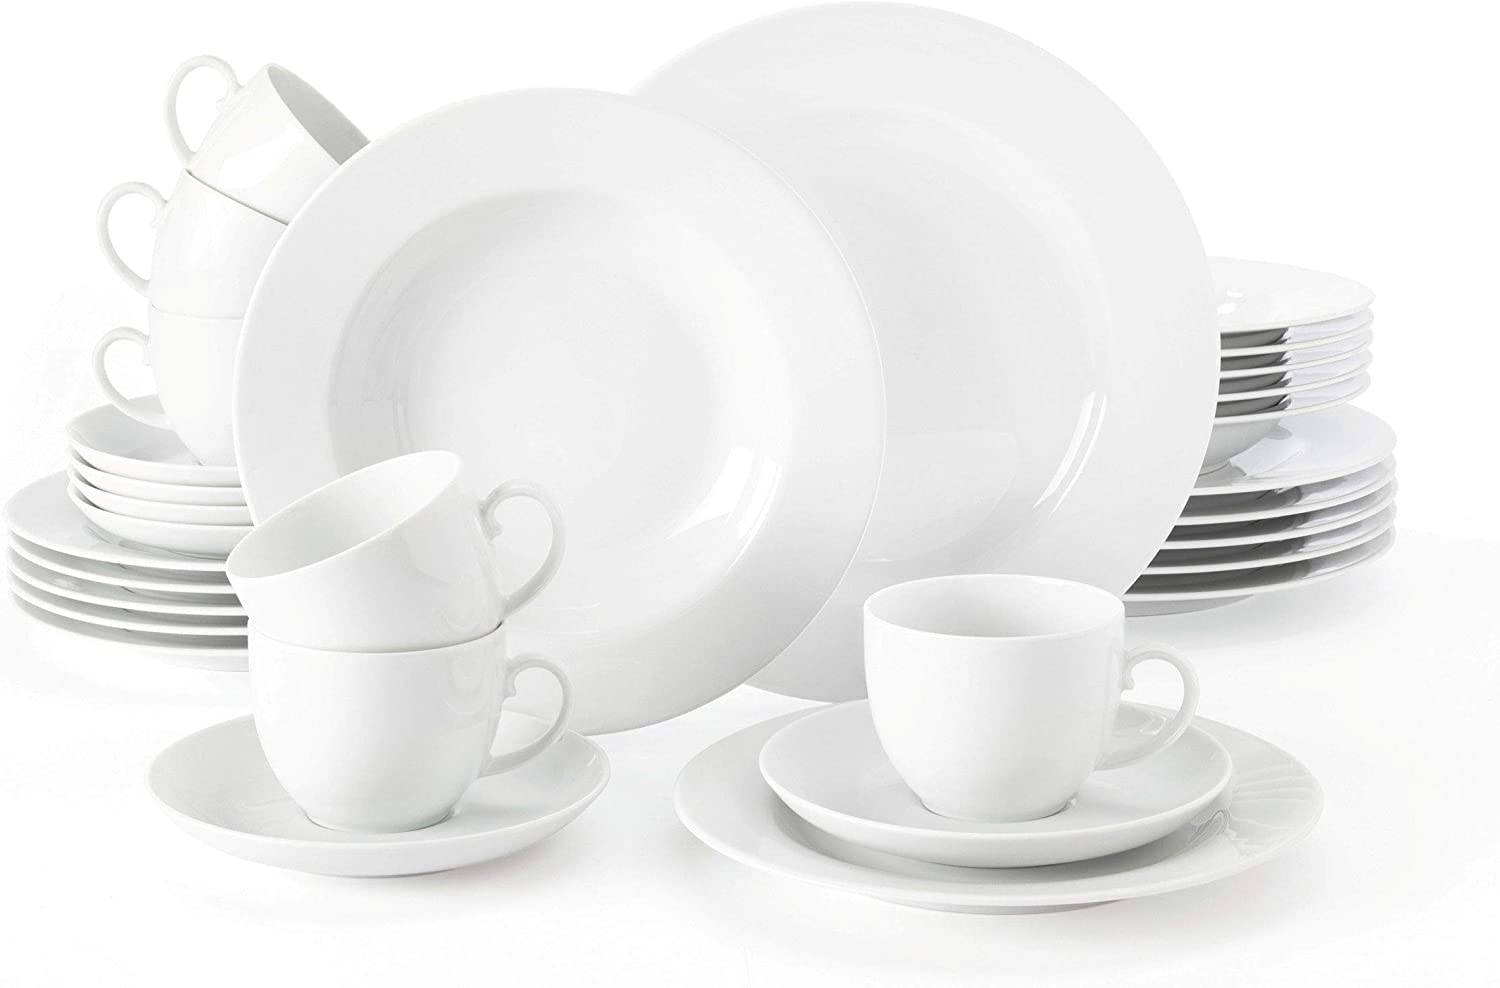 Seltmann Weiden Rondo Series 30-Piece Crockery Set for up to 6 People, Includes 6 Dinner Plates, Soup Plates, Breakfast Plates, Coffee Top and Saucers